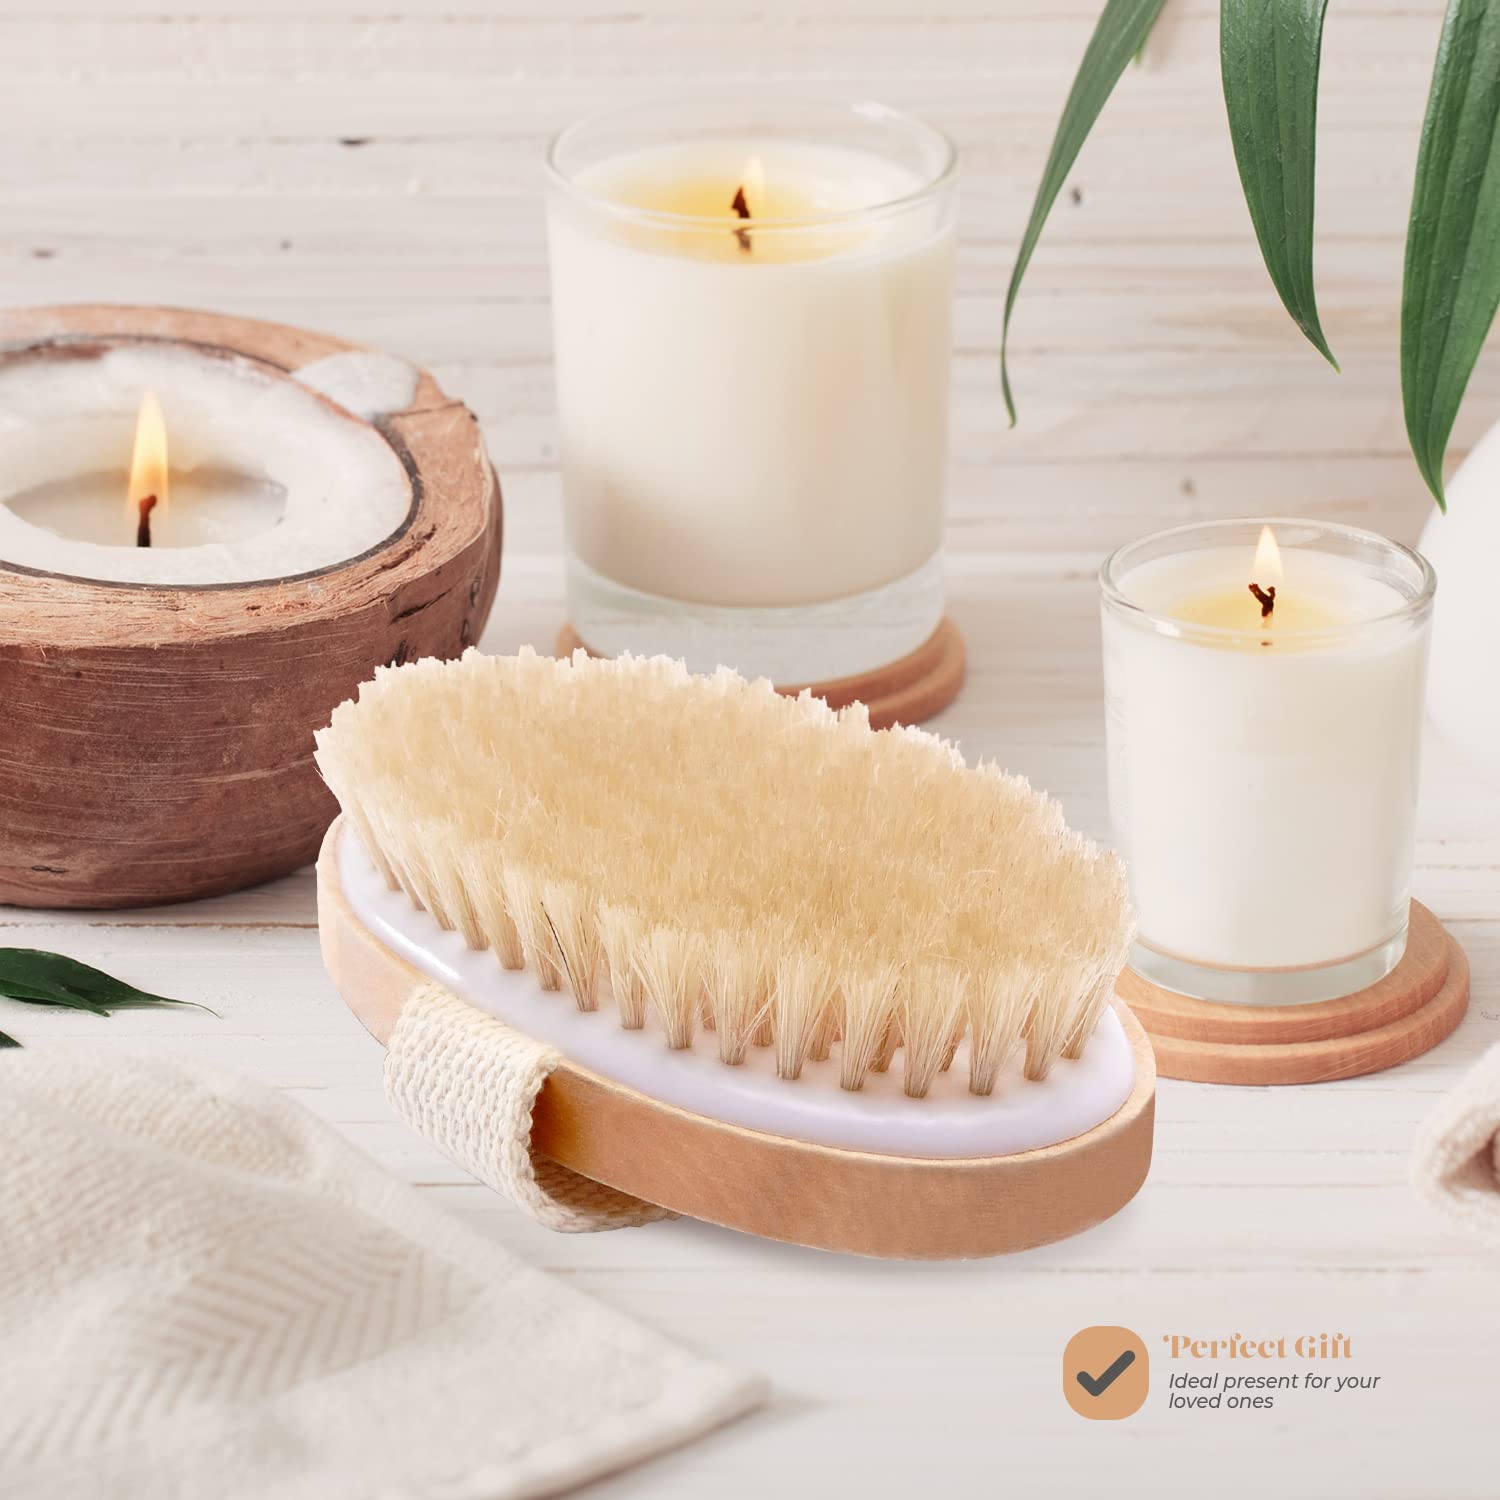 Dry Skin Body Brush - Improves Skin's Health and Beauty - Natural Bristle - Remove Dead Skin and Toxins, Cellulite Treatment, Improves Lymphatic Functions, Exfoliates, Stimulates Blood Circulation